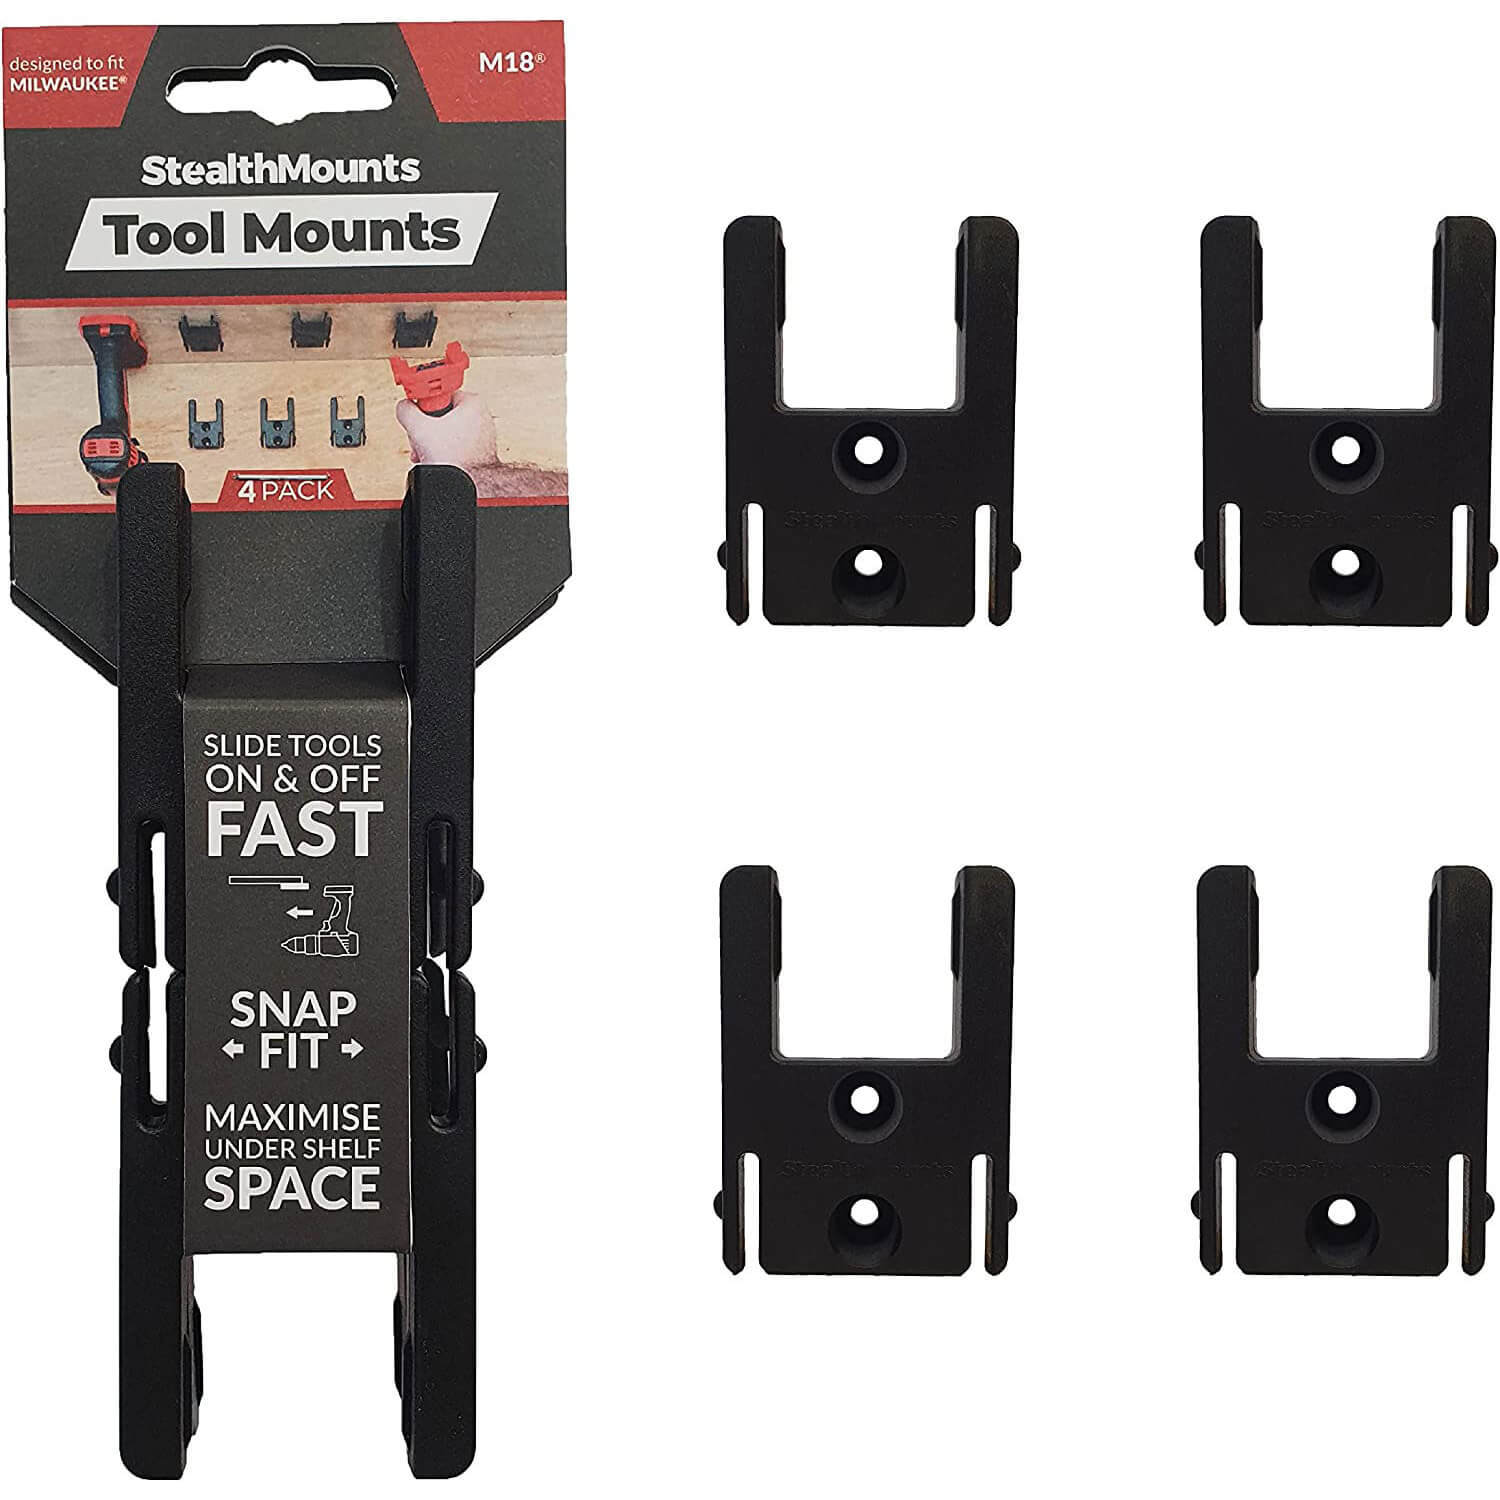 Image of Stealth Mounts 4 Pack Tool Mounts For Milwaukee 18v M18 Tools Black